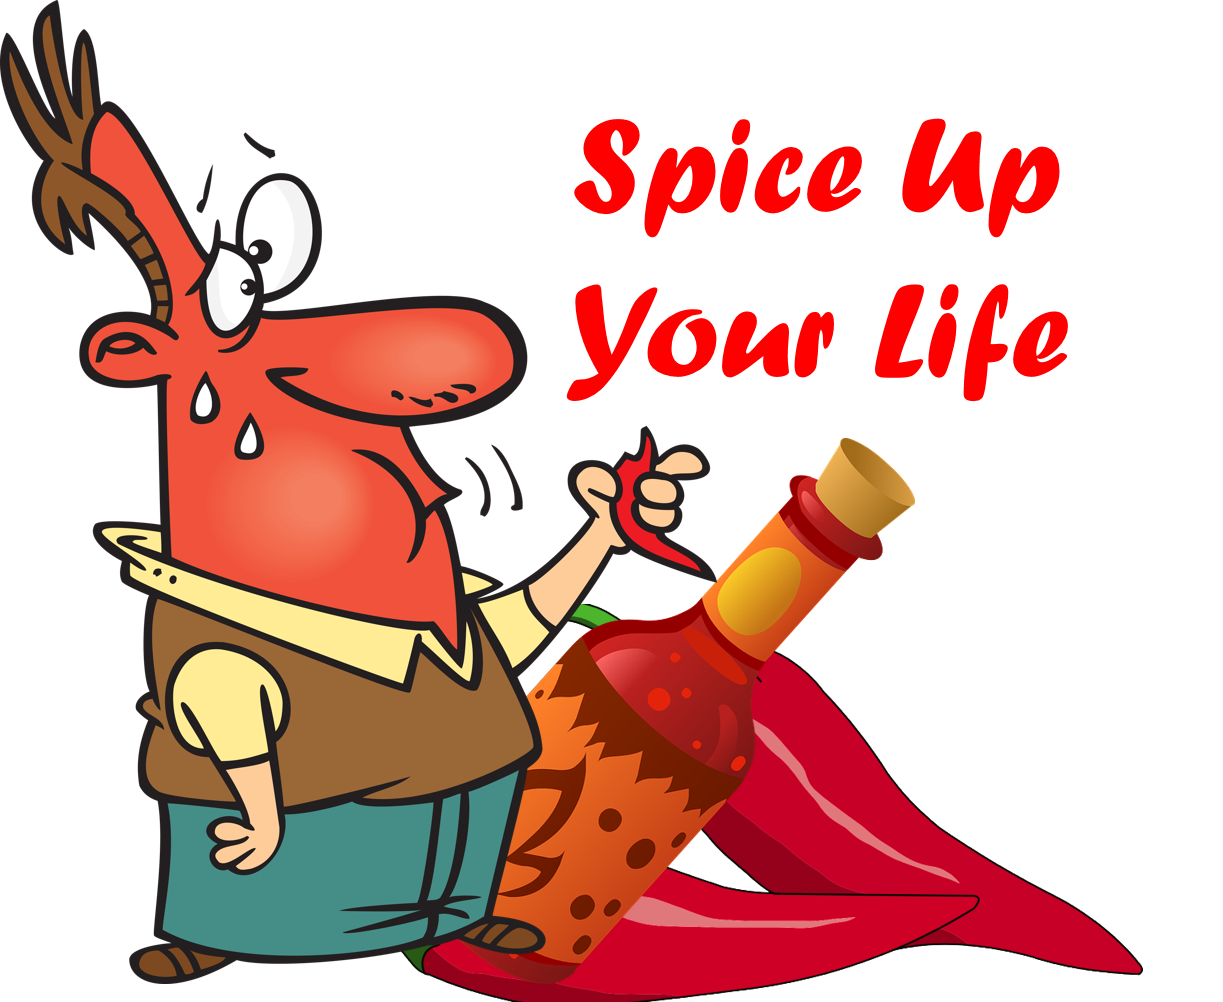 Clip Arts Related To : spicy food clipart. view all Cooking Spices Cliparts...